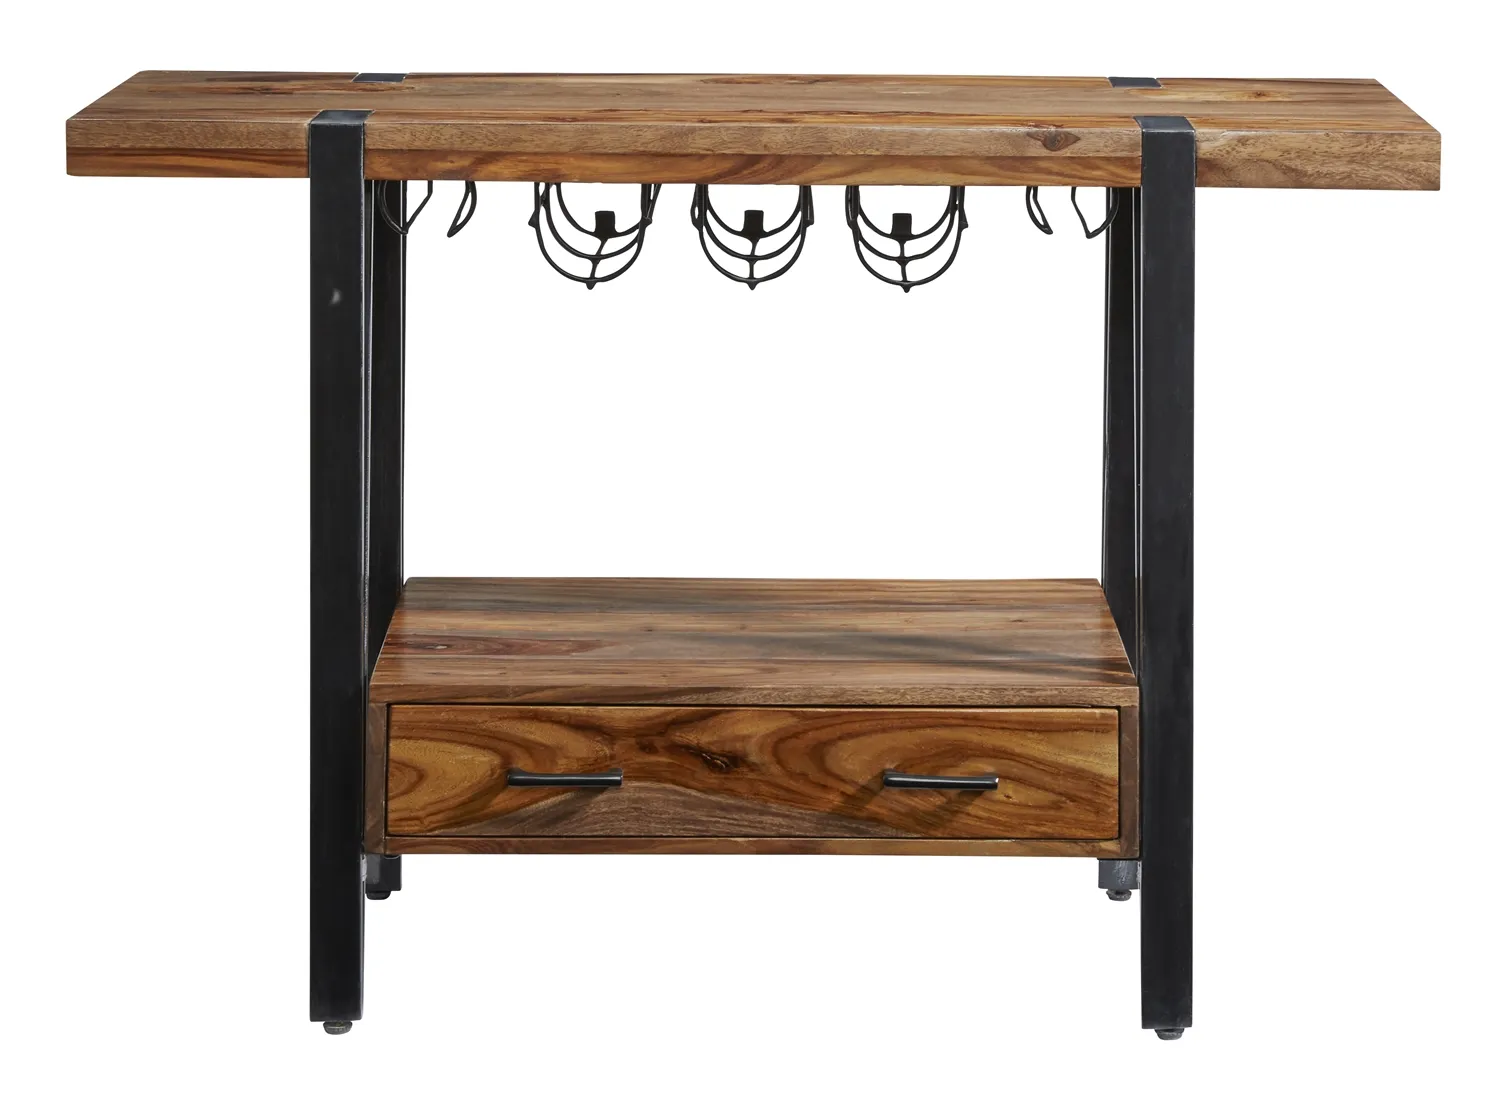 CAIN INDUSTRIAL STYLE ONE DRAWER WINE CONSOLE WITH WINE AND STEMWARE RACK - DARK SHEESHAM WOOD